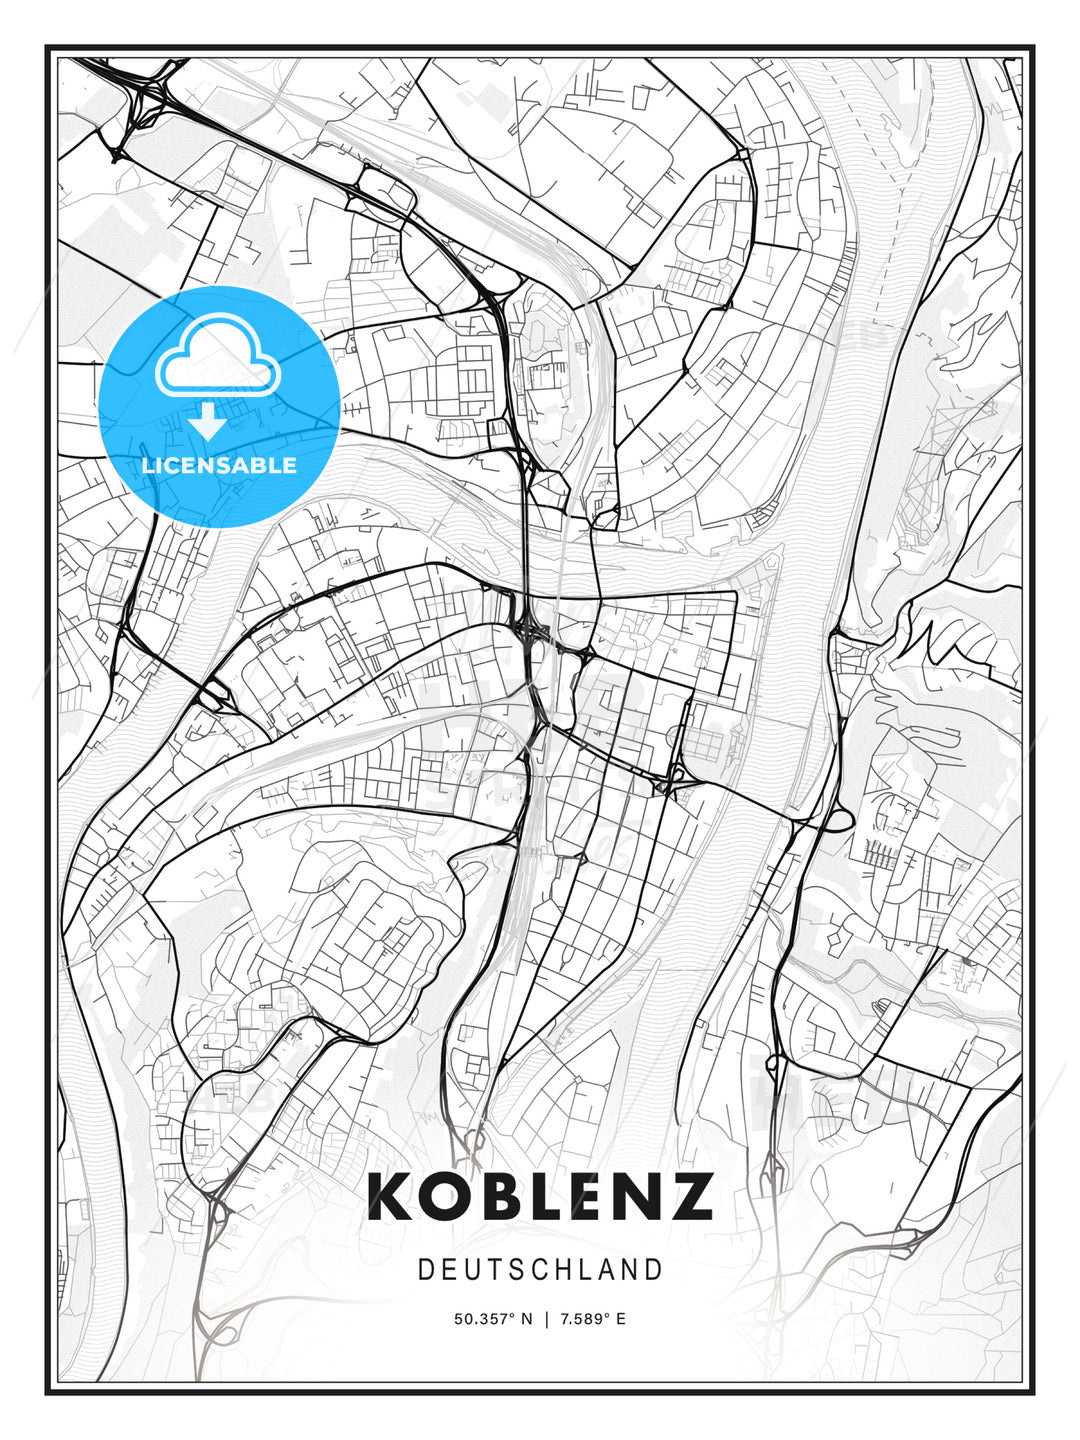 Koblenz, Germany, Modern Print Template in Various Formats - HEBSTREITS Sketches